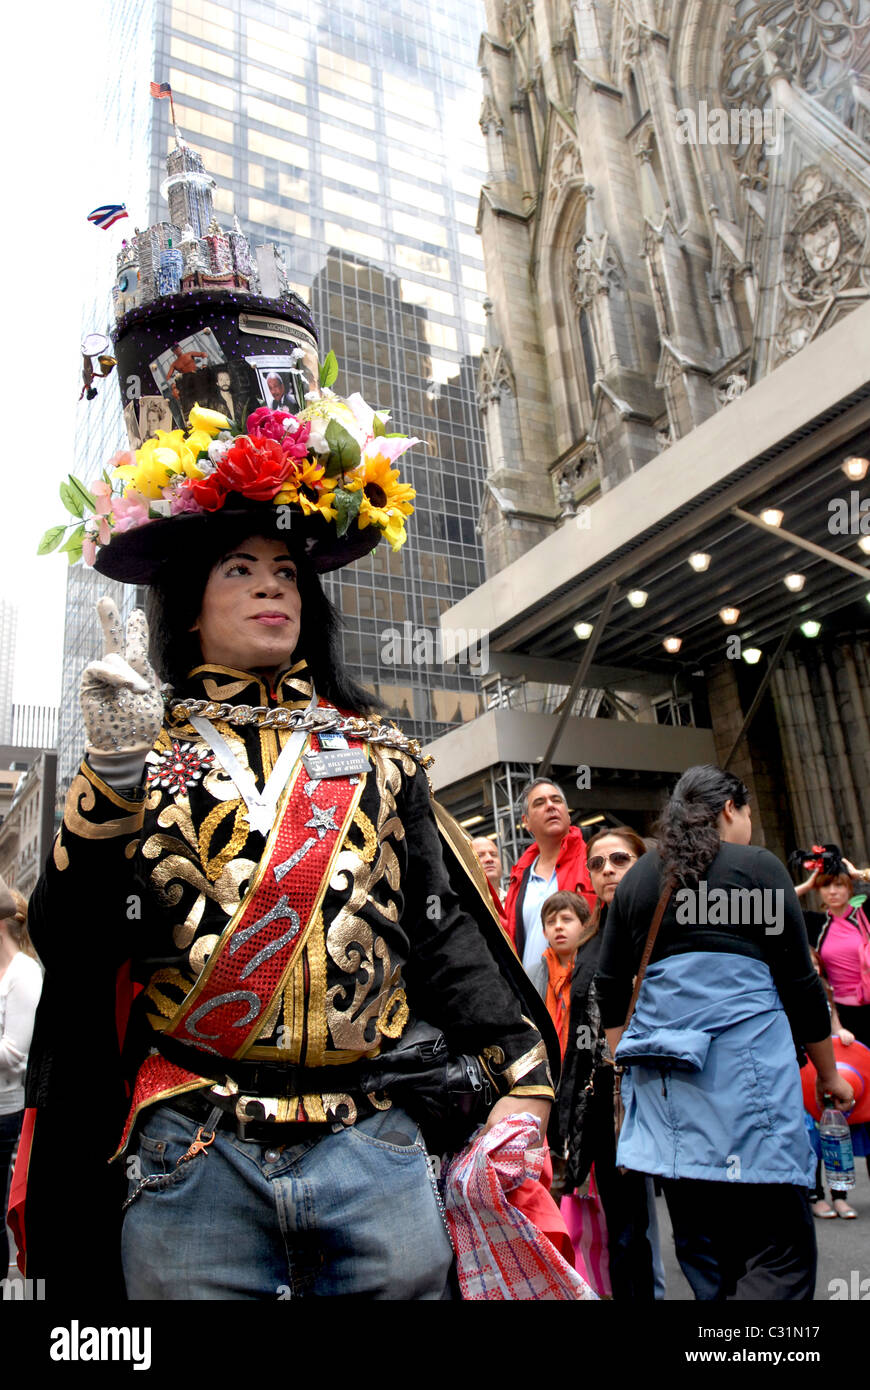 A Michael Jackson impersonator in the Easter Parade on Fifth Avenue New York Stock Photo